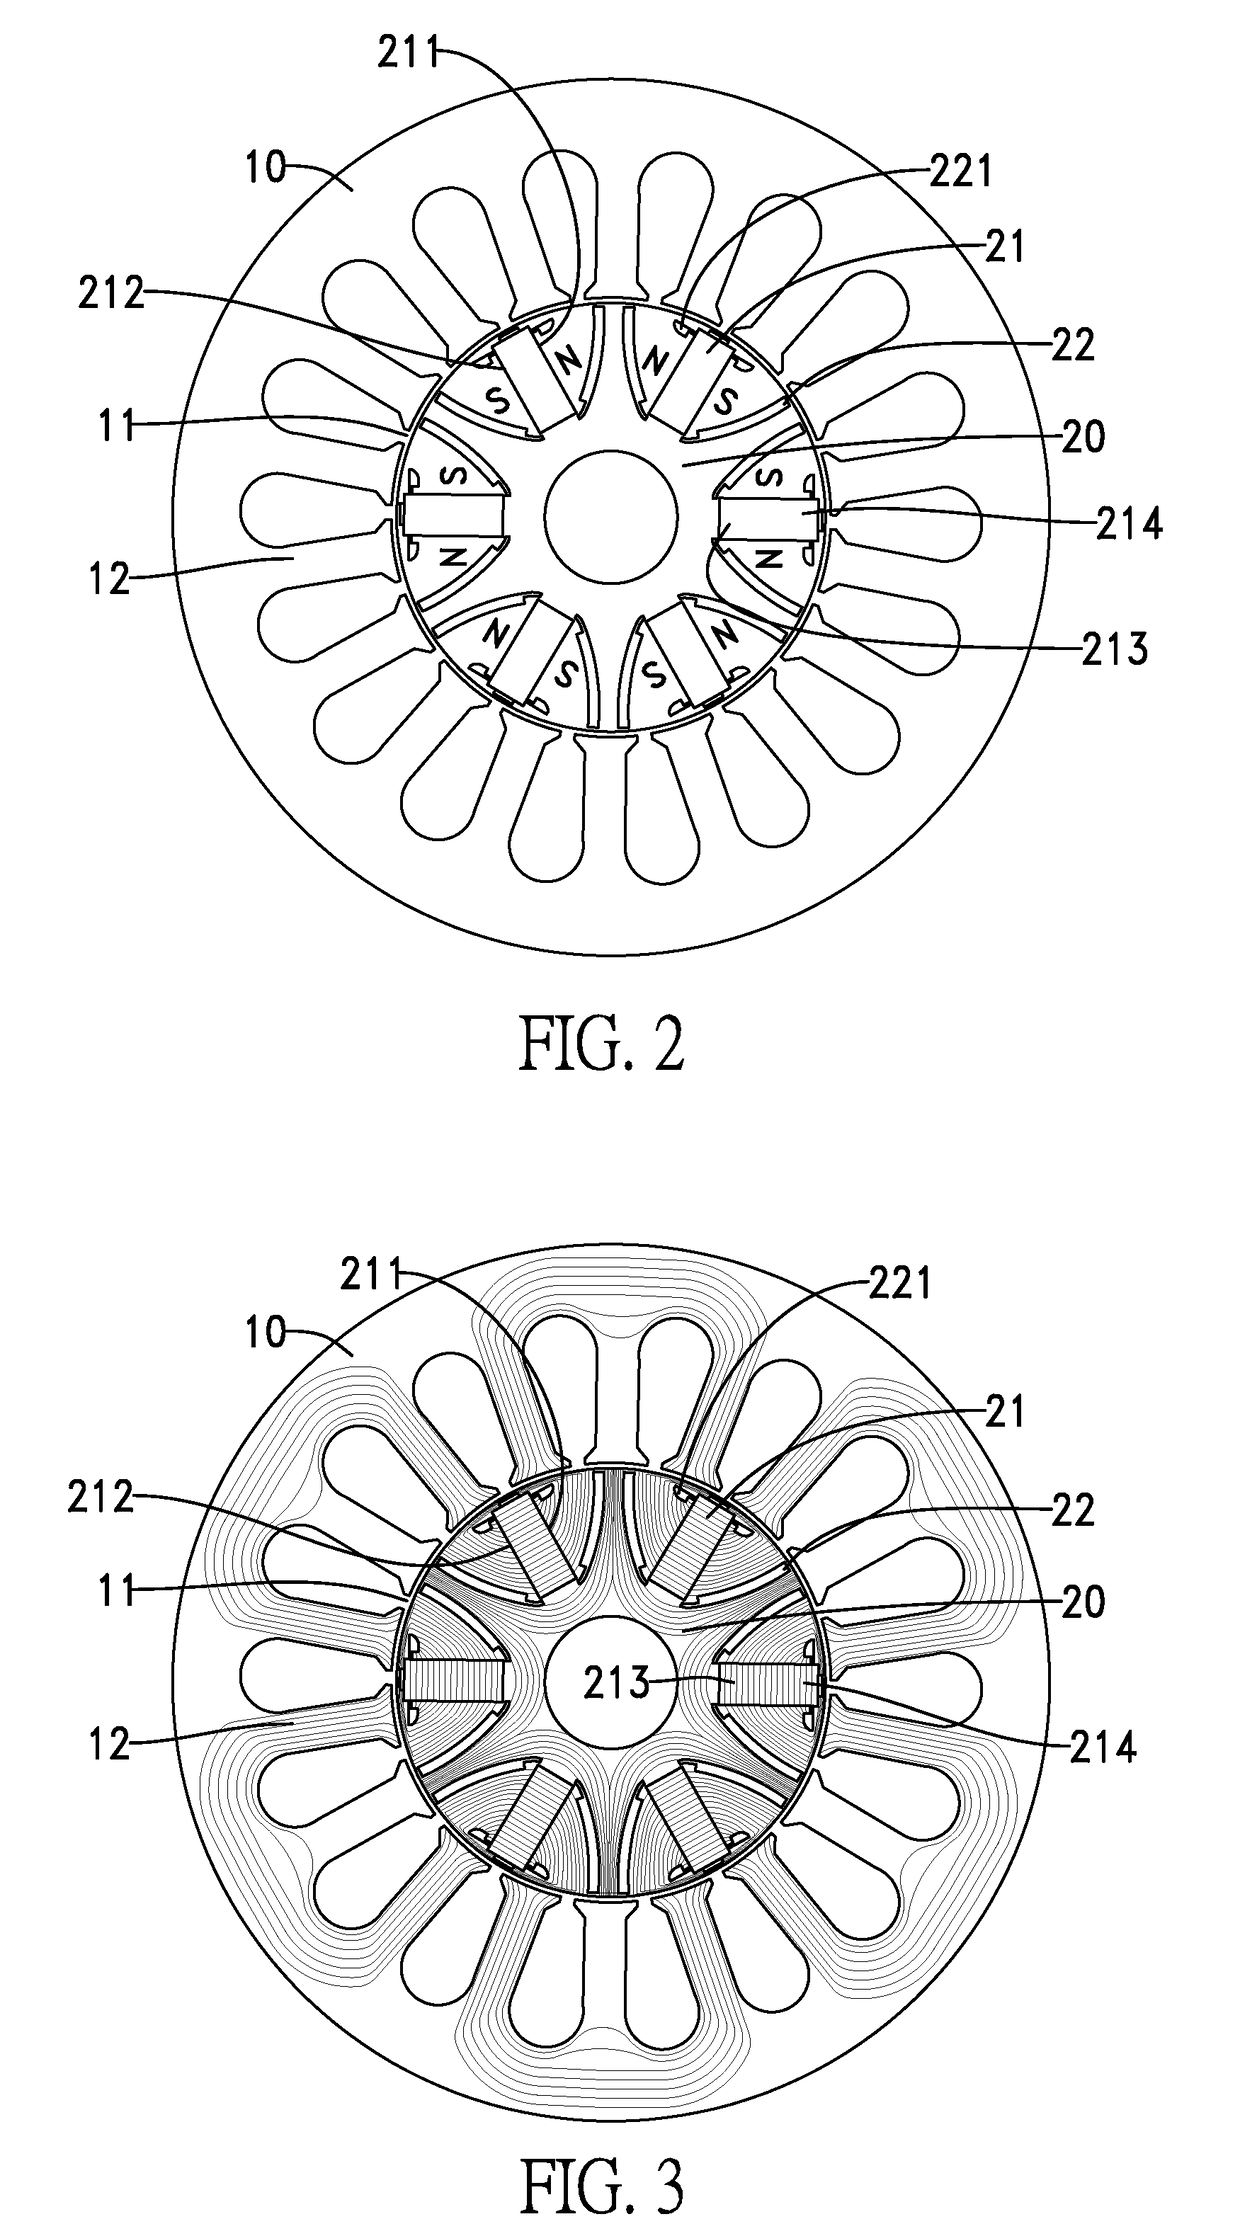 Interior permanent magnet motor with flux strengthening